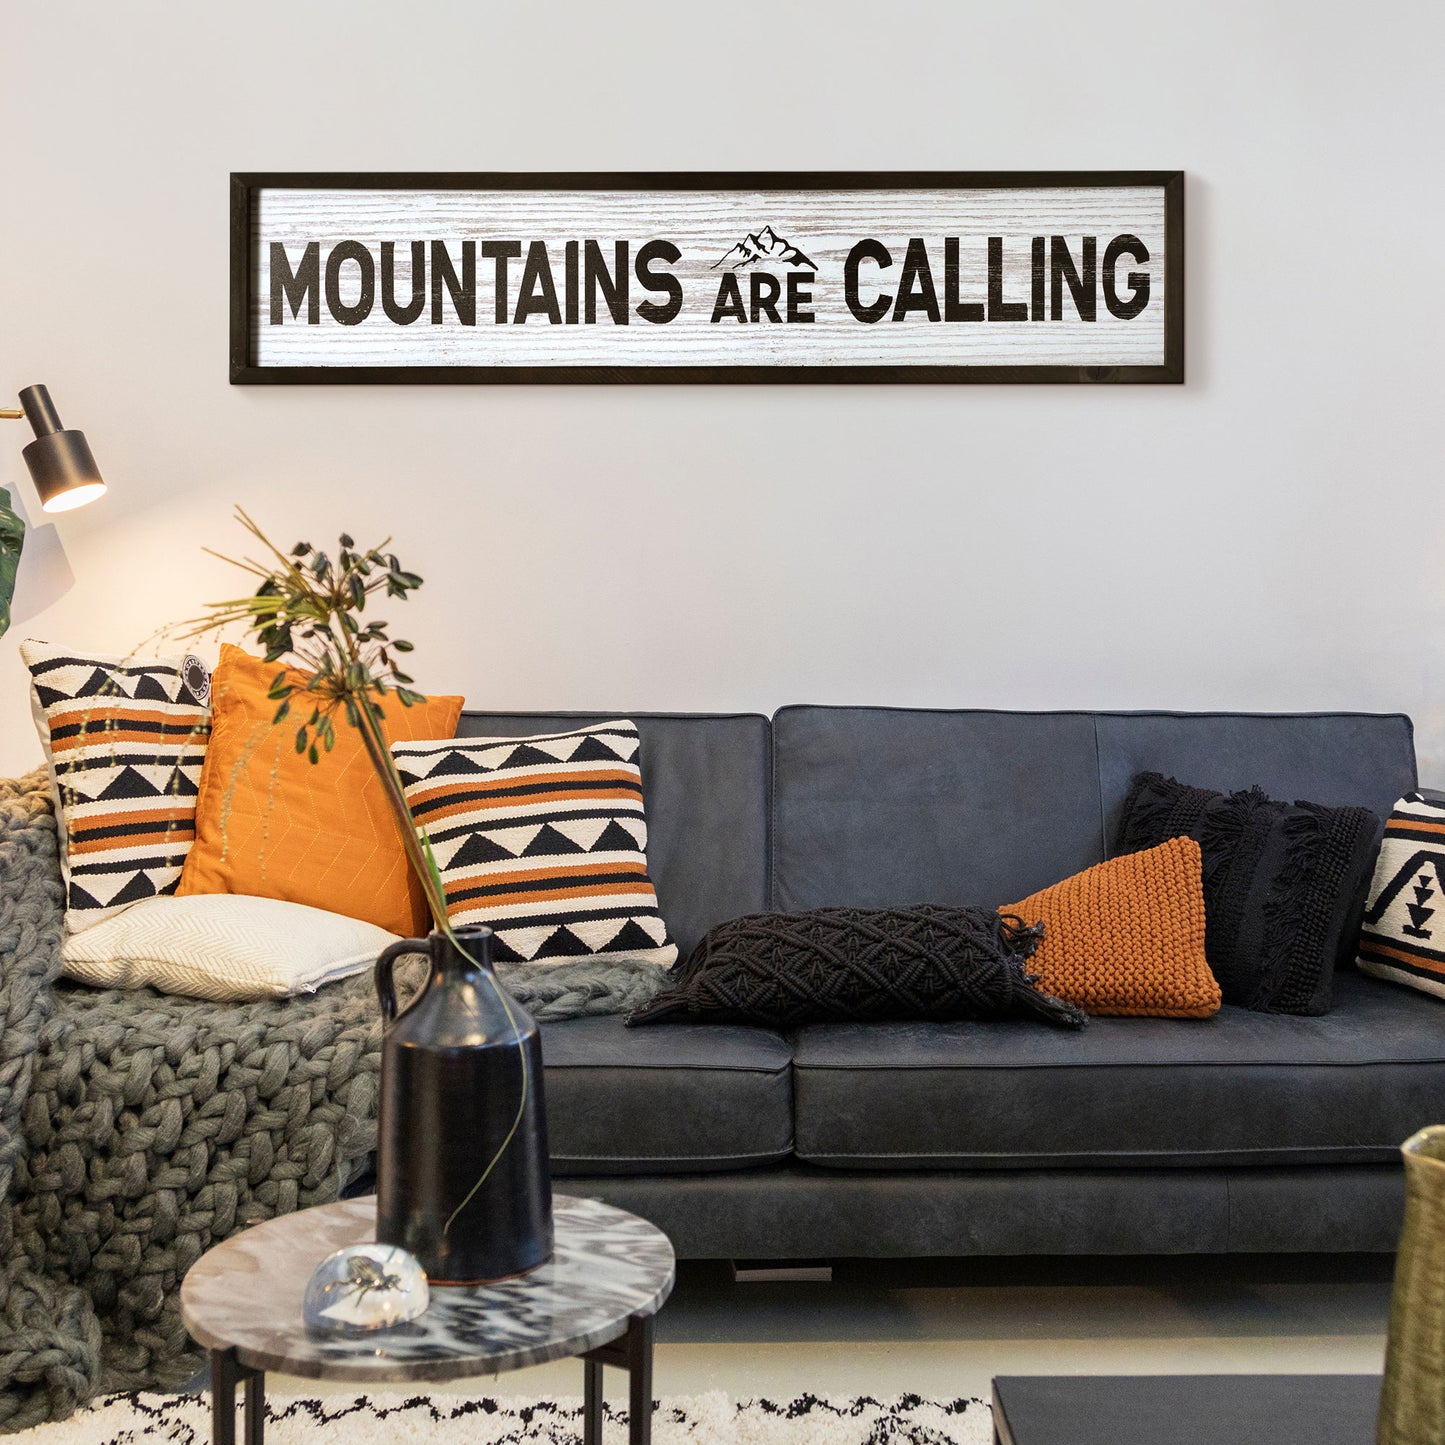 Mountains Are Calling Wood Novelty Wall Sign  - 36" x 8"